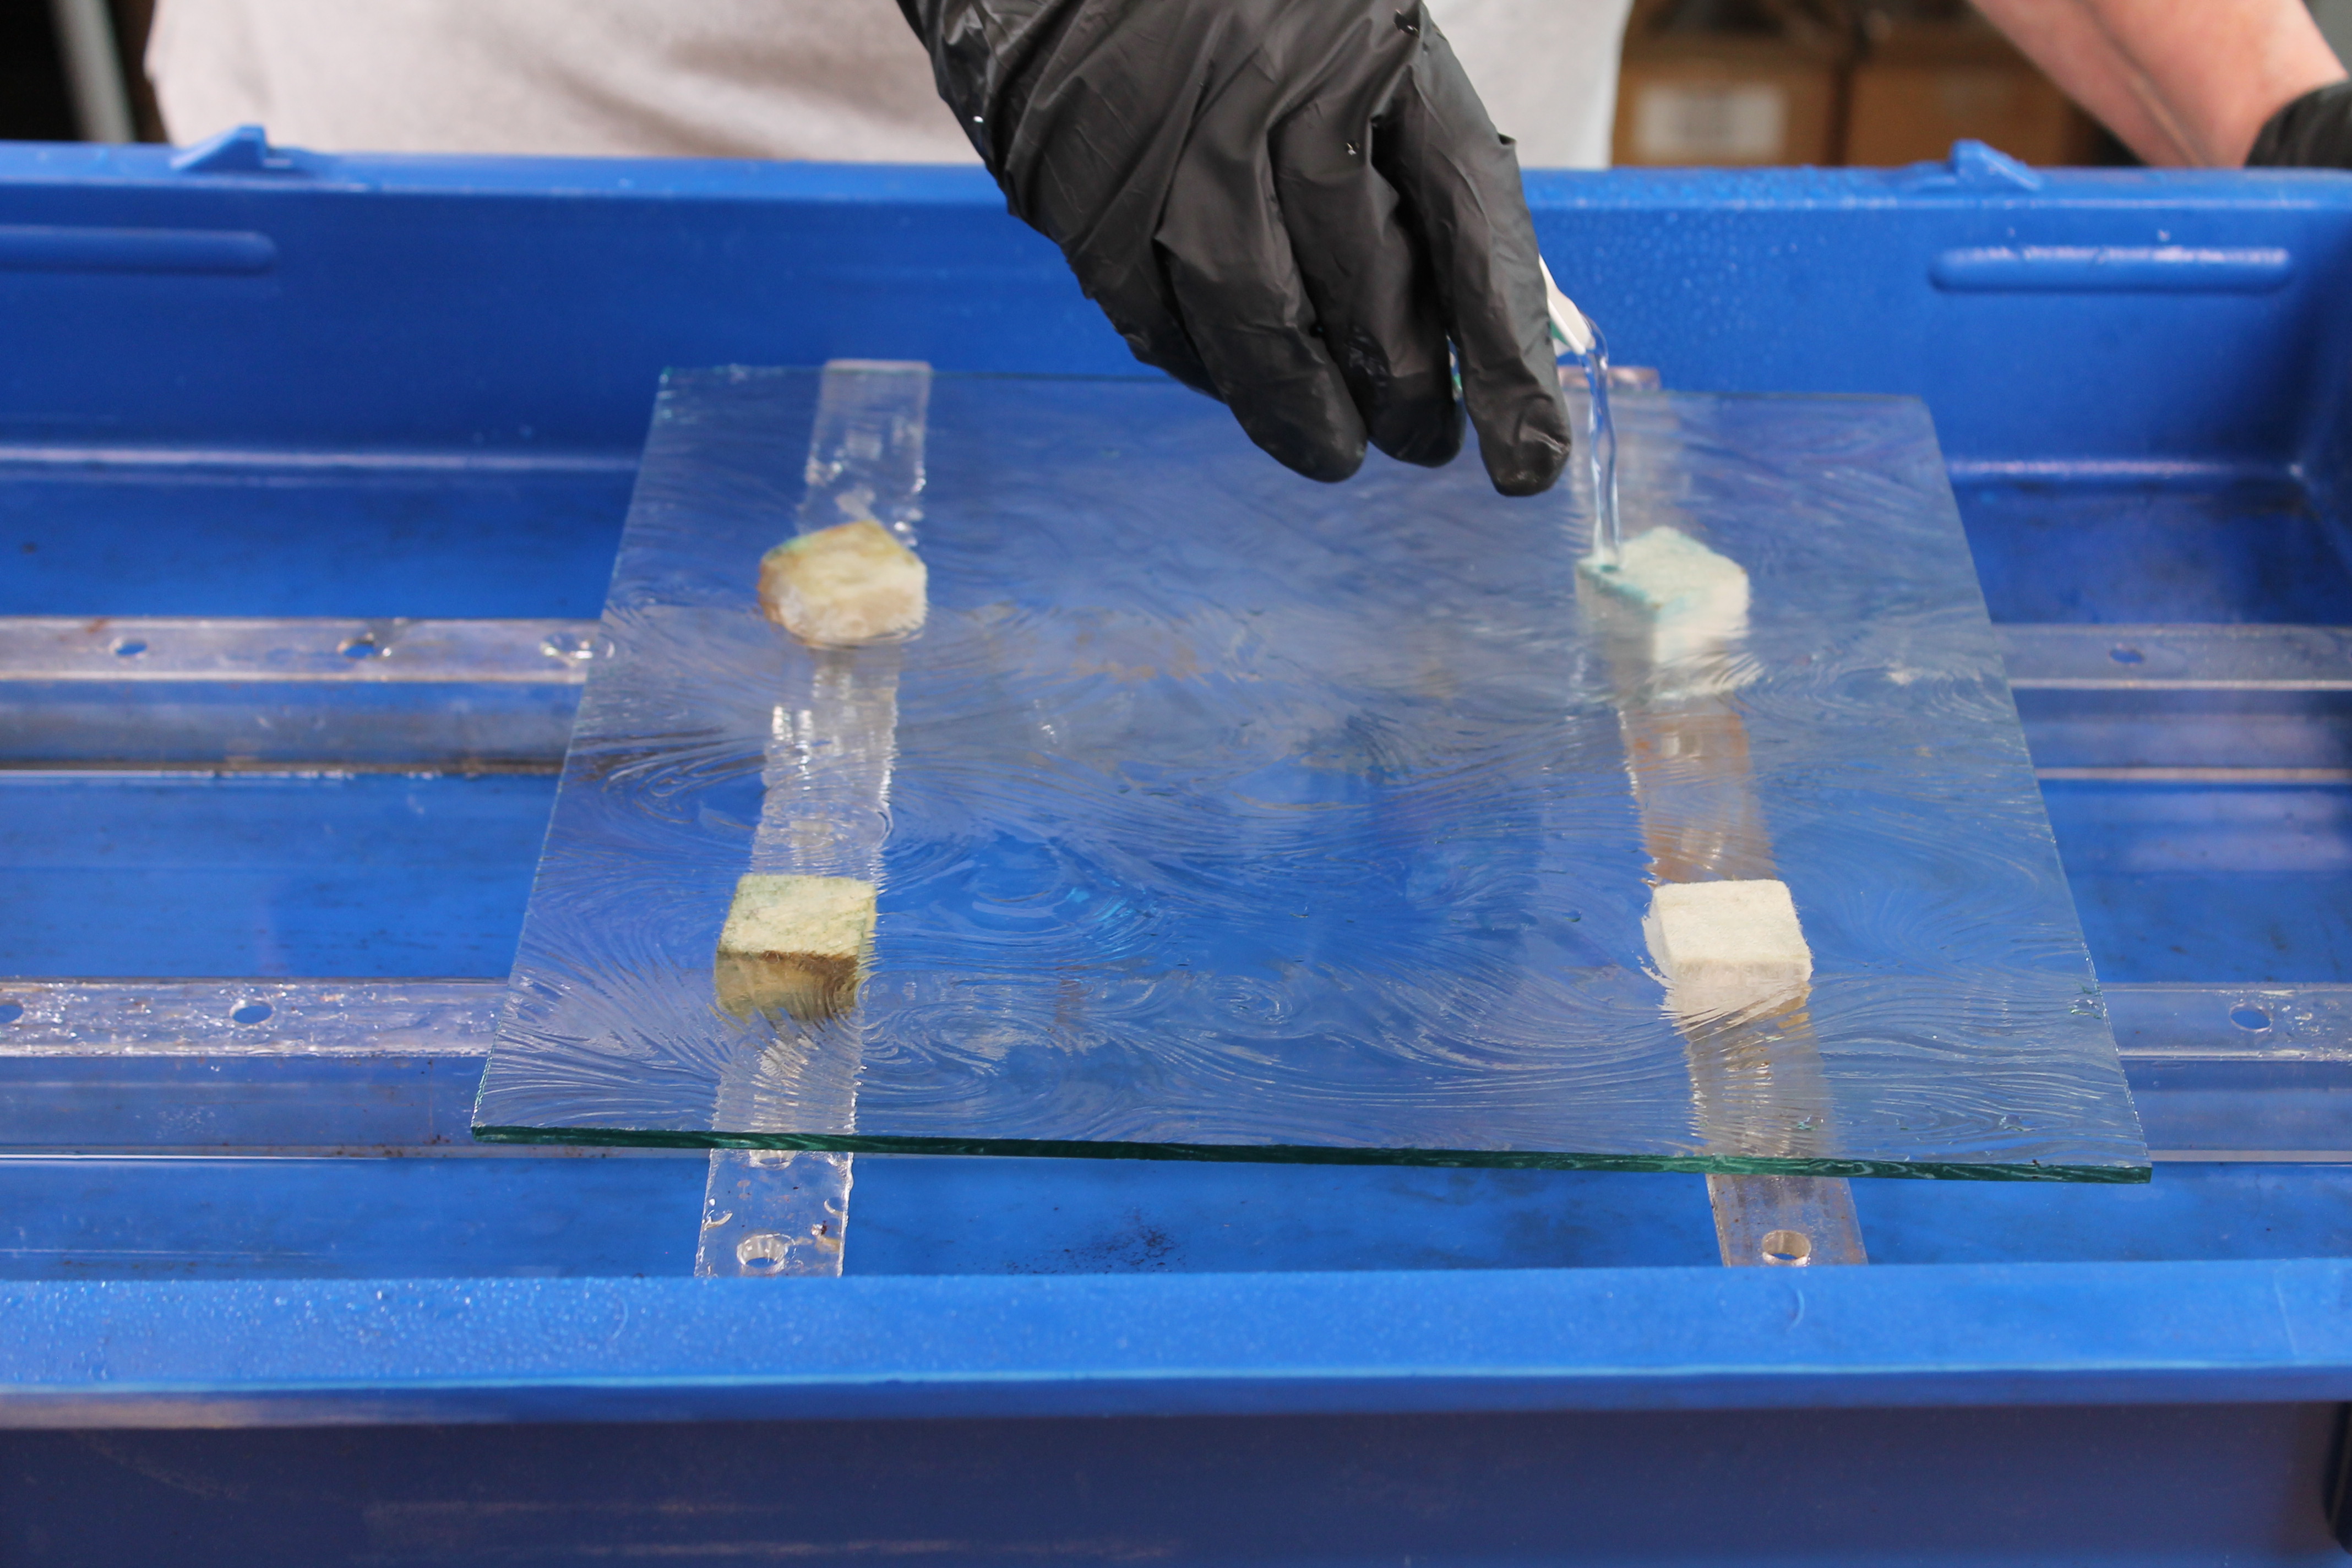 Pouring Silvering Chemicals on textured glass in a Bench Kit Tray